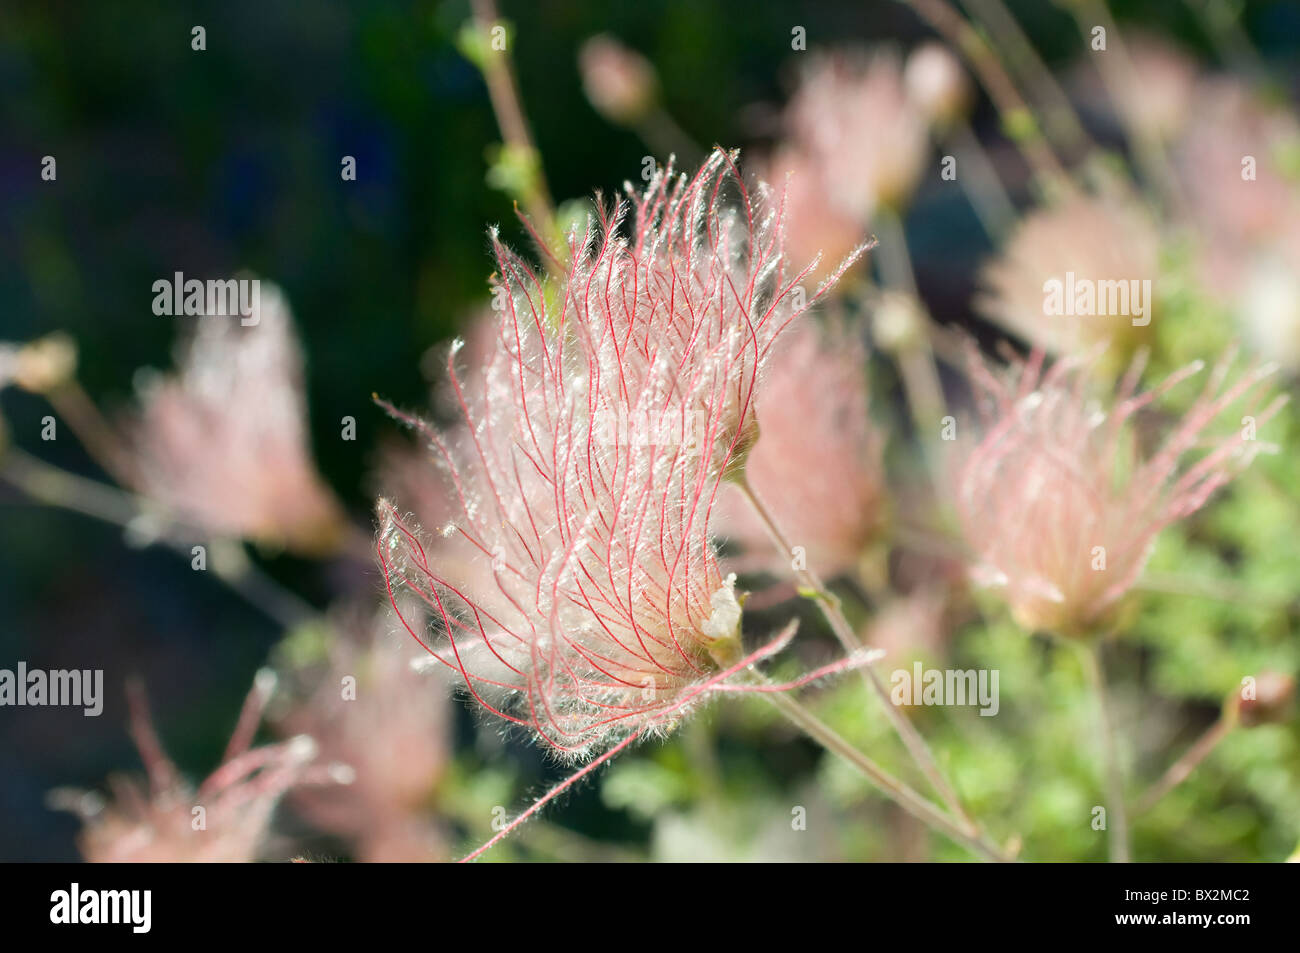 Tufts on Apache Plume in Santa Fe New Mexico Stock Photo